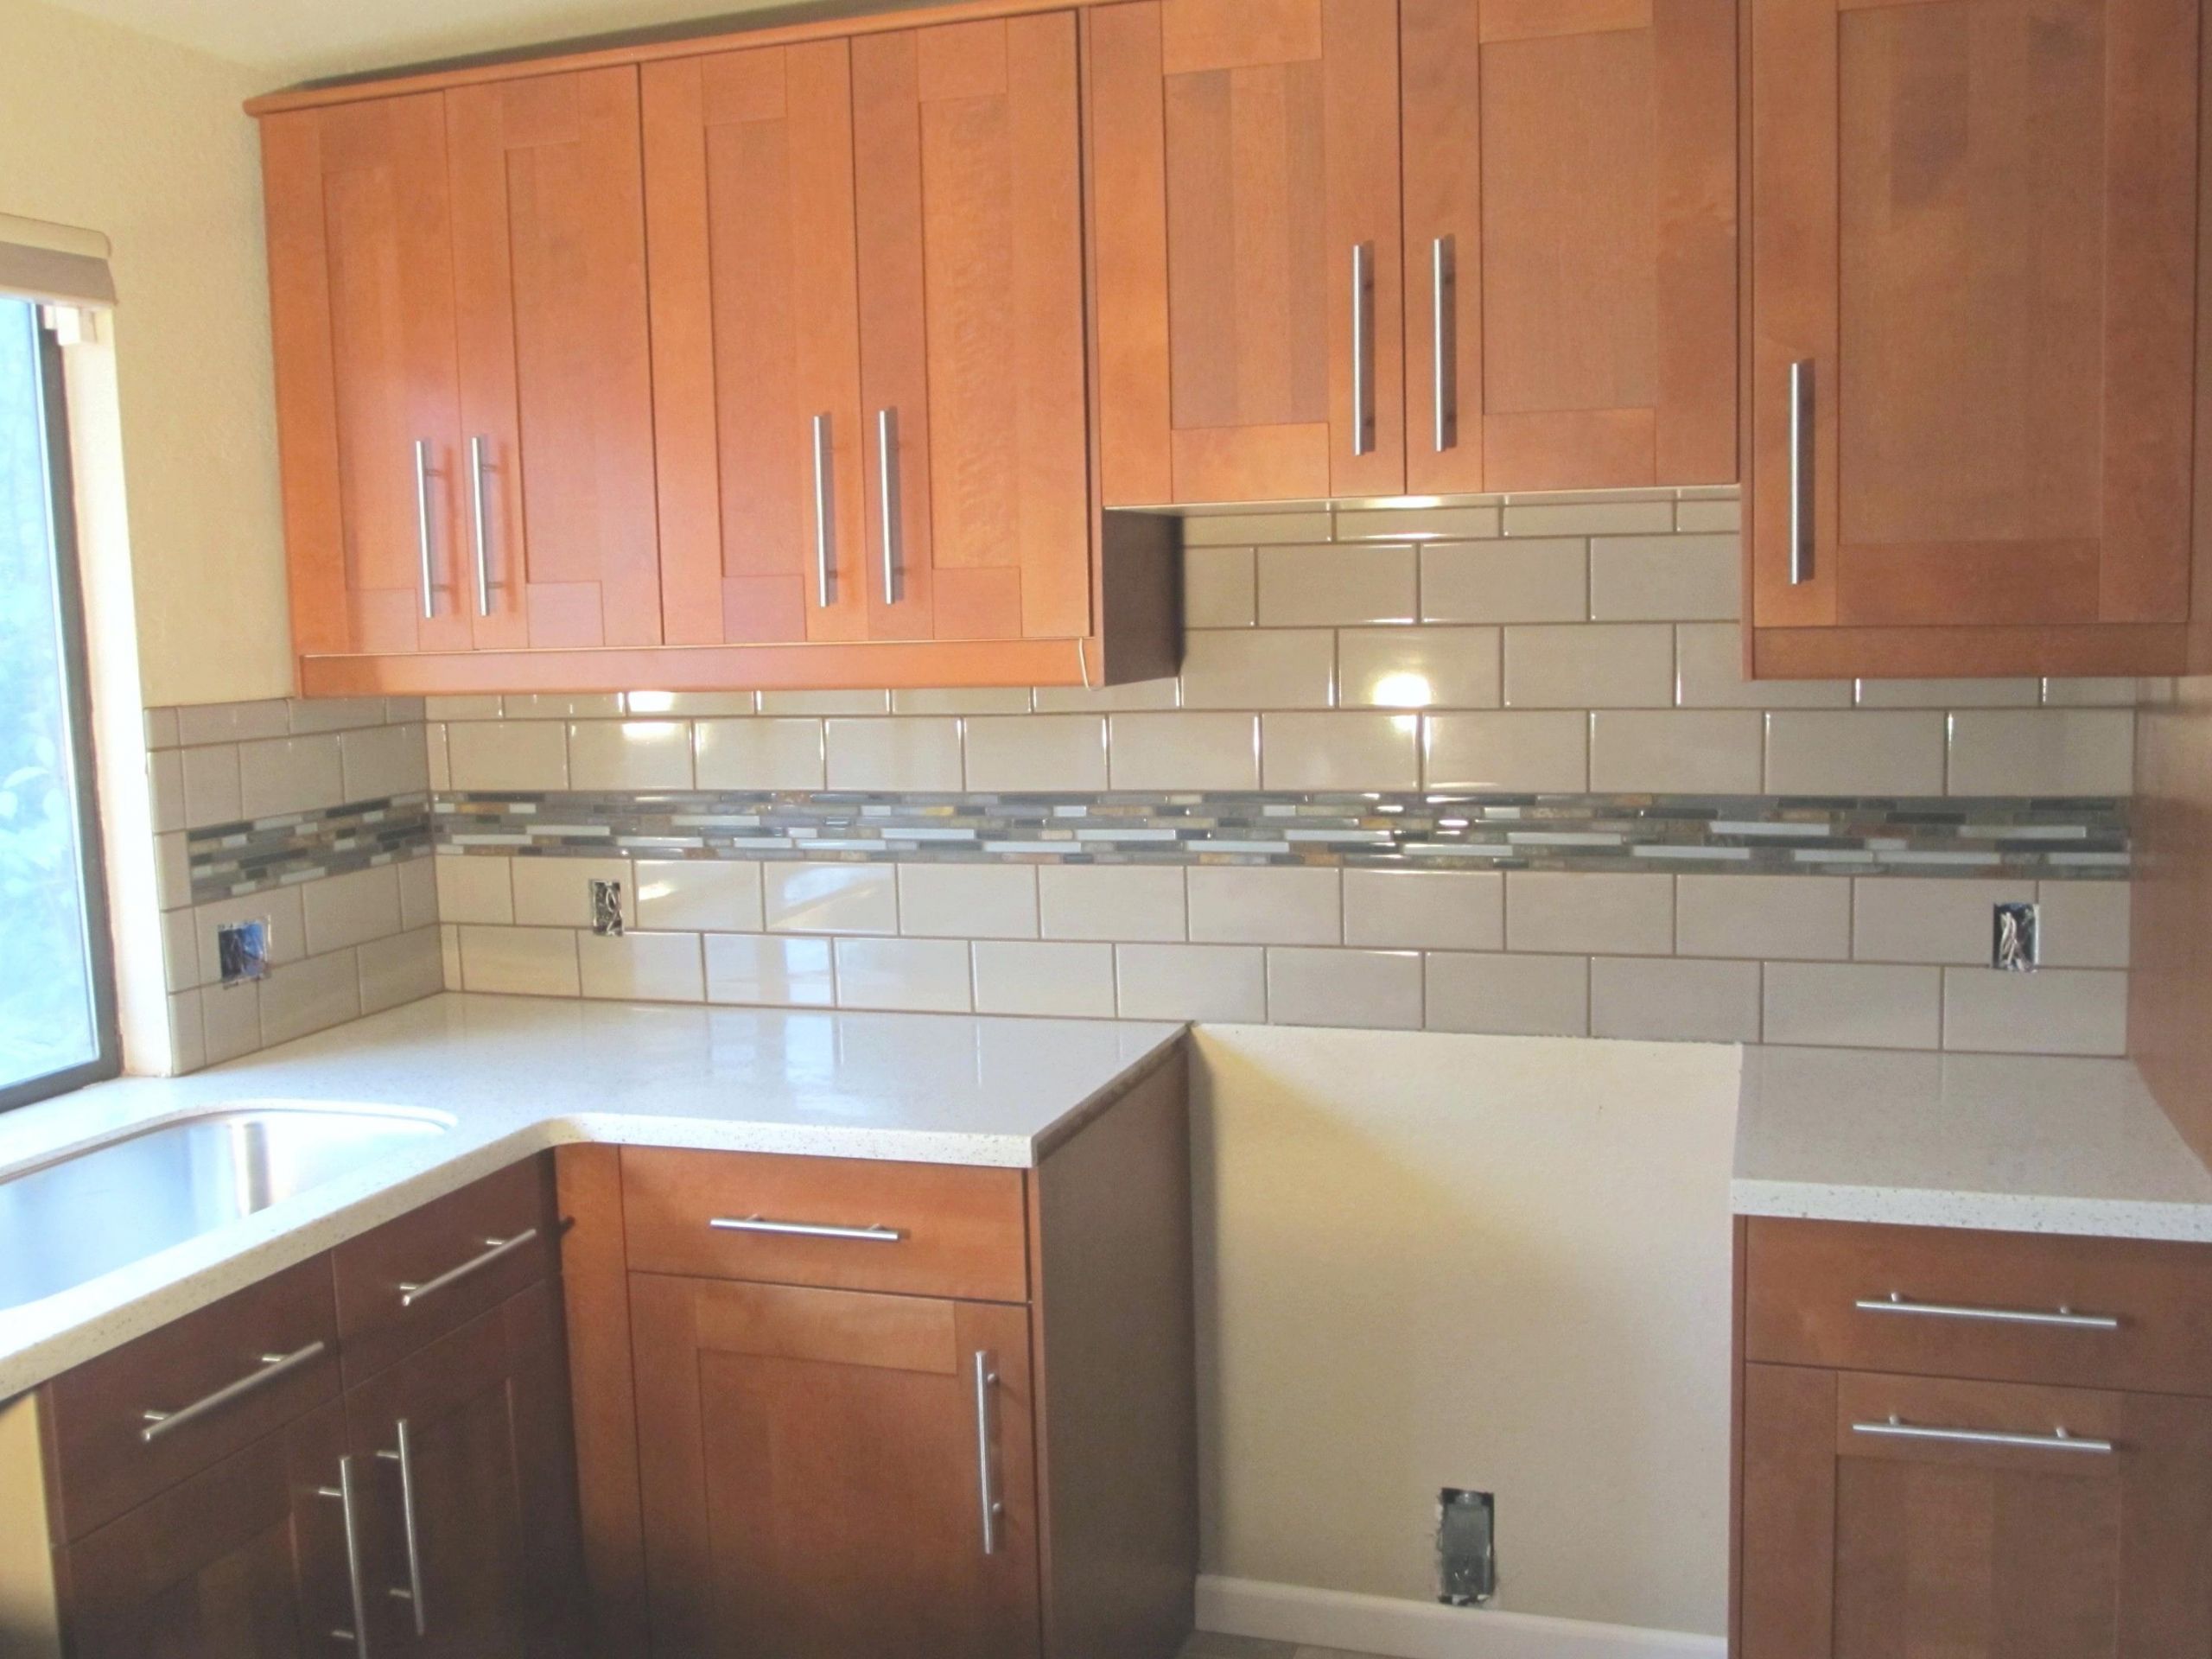 Kitchen Backsplash Installation Cost
 How Much Does Home Depot Charge To Install Tile